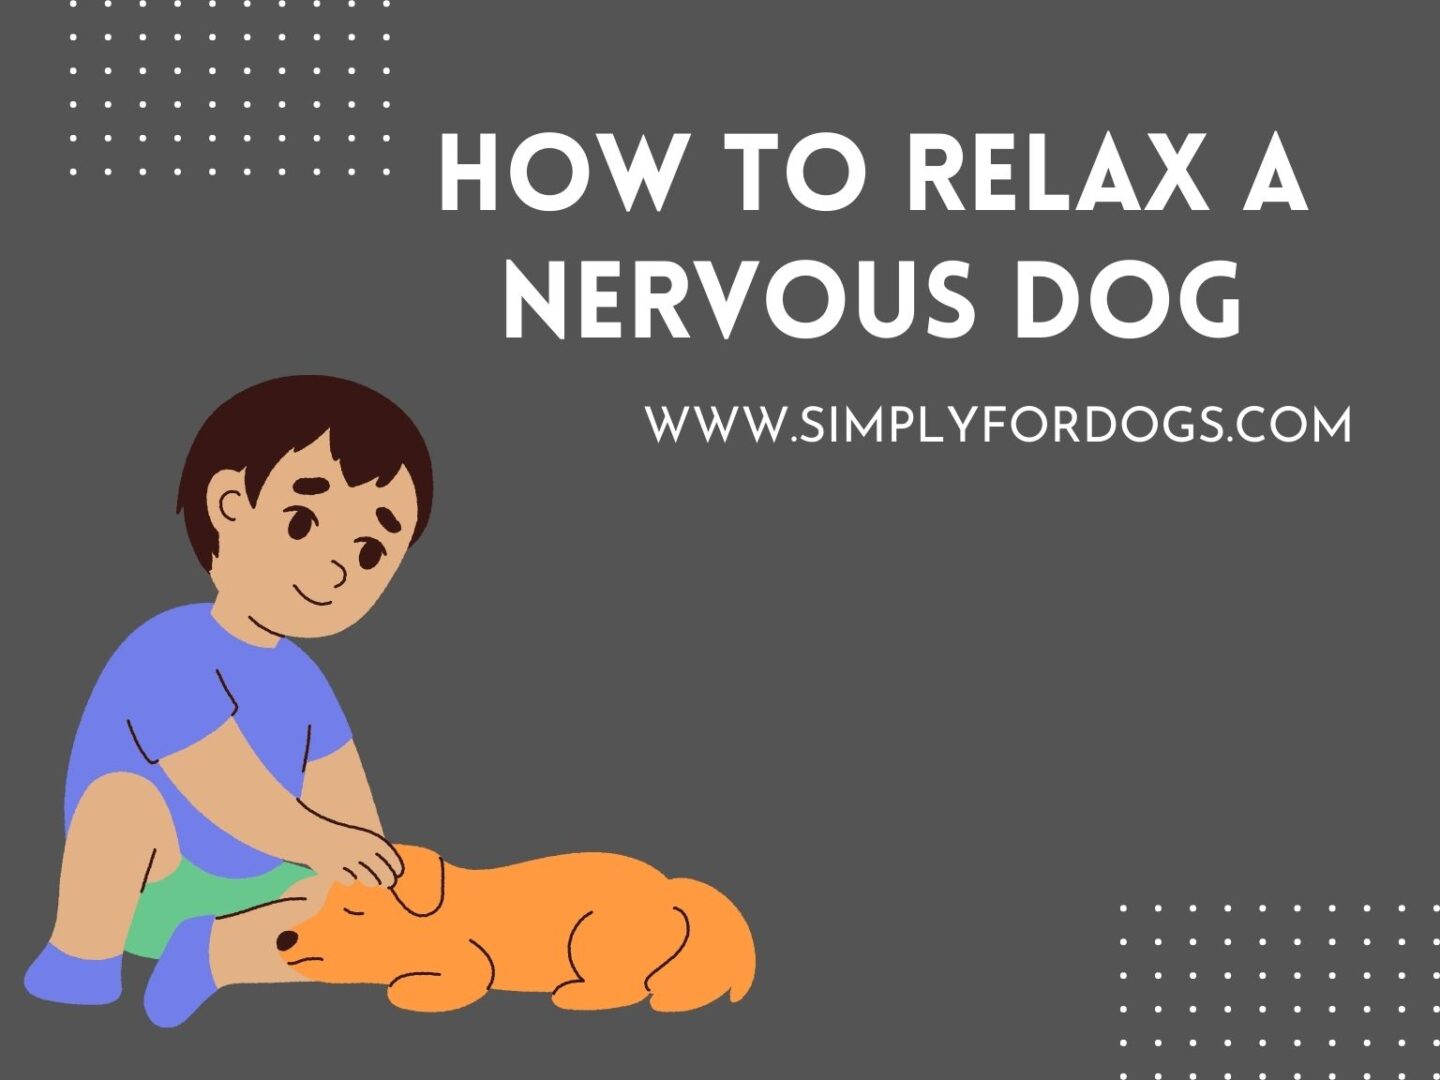 How to Relax a Nervous Dog